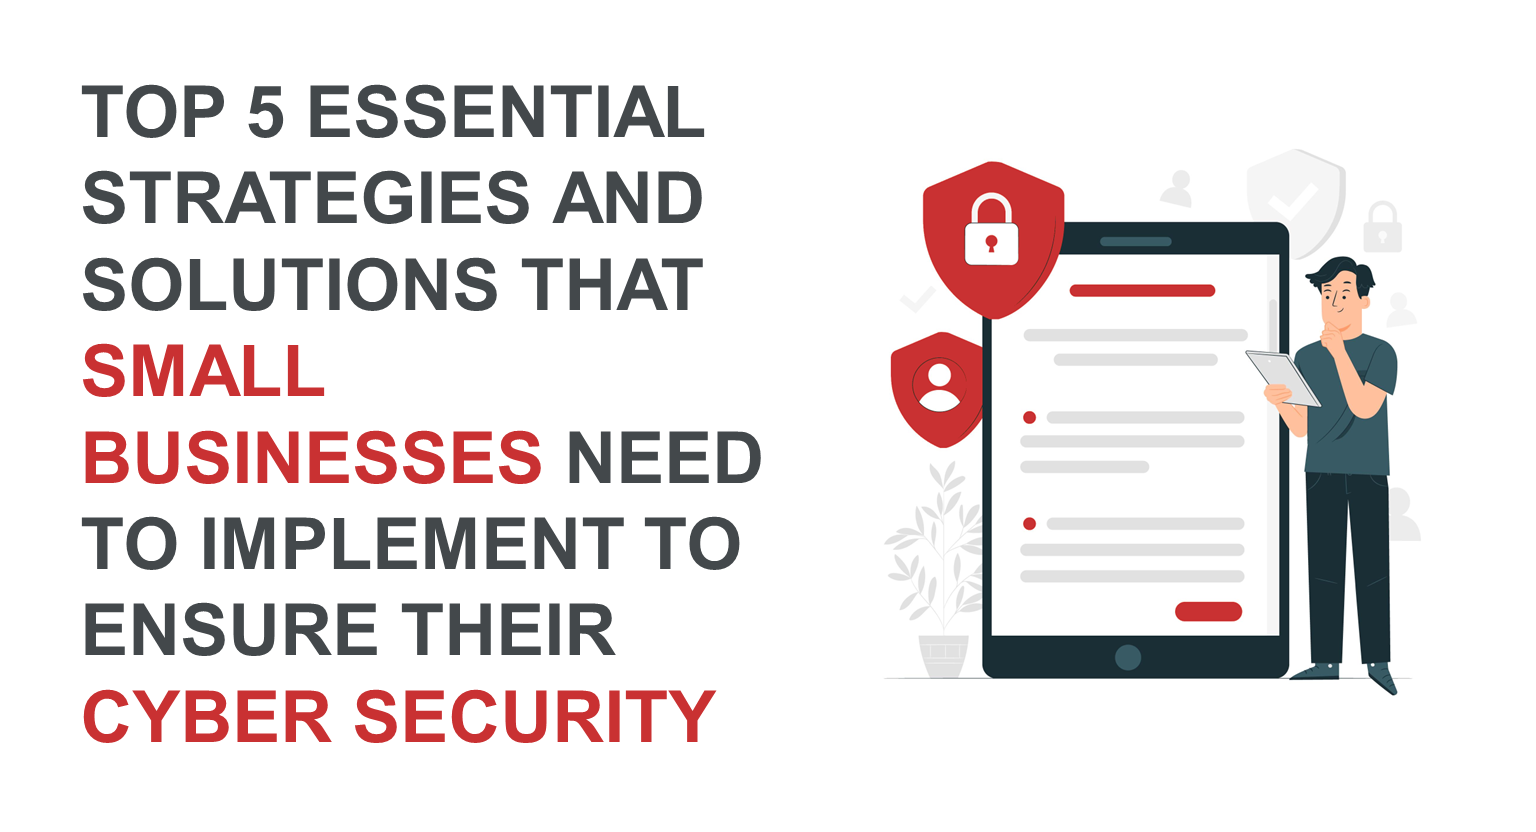 Top 5 Essential Strategies And Solutions That Small Businesses Need To Implement To Ensure Their Cyber Security